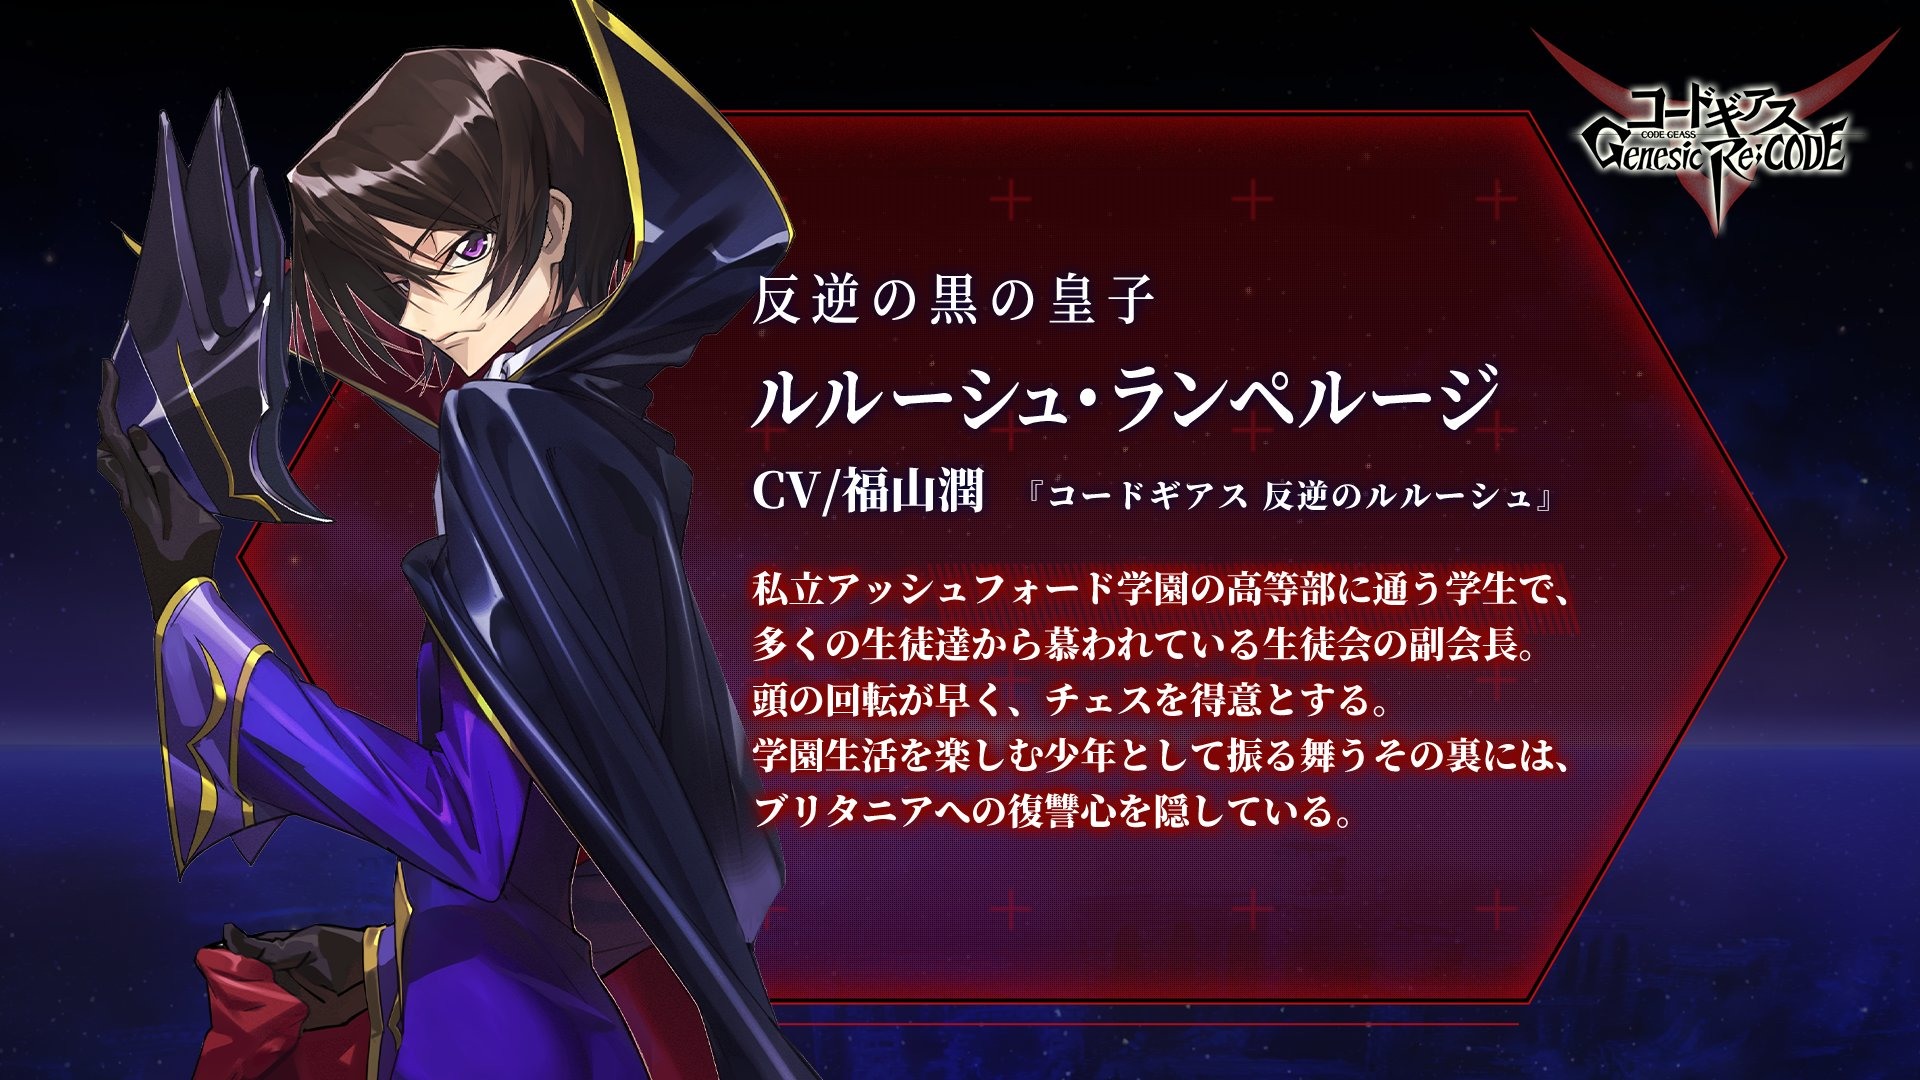 Code Geass Genesic Re Code Reveals The Debut Characters Of Lelouch Olufie And The New Protagonist Bahamut Newsdir3